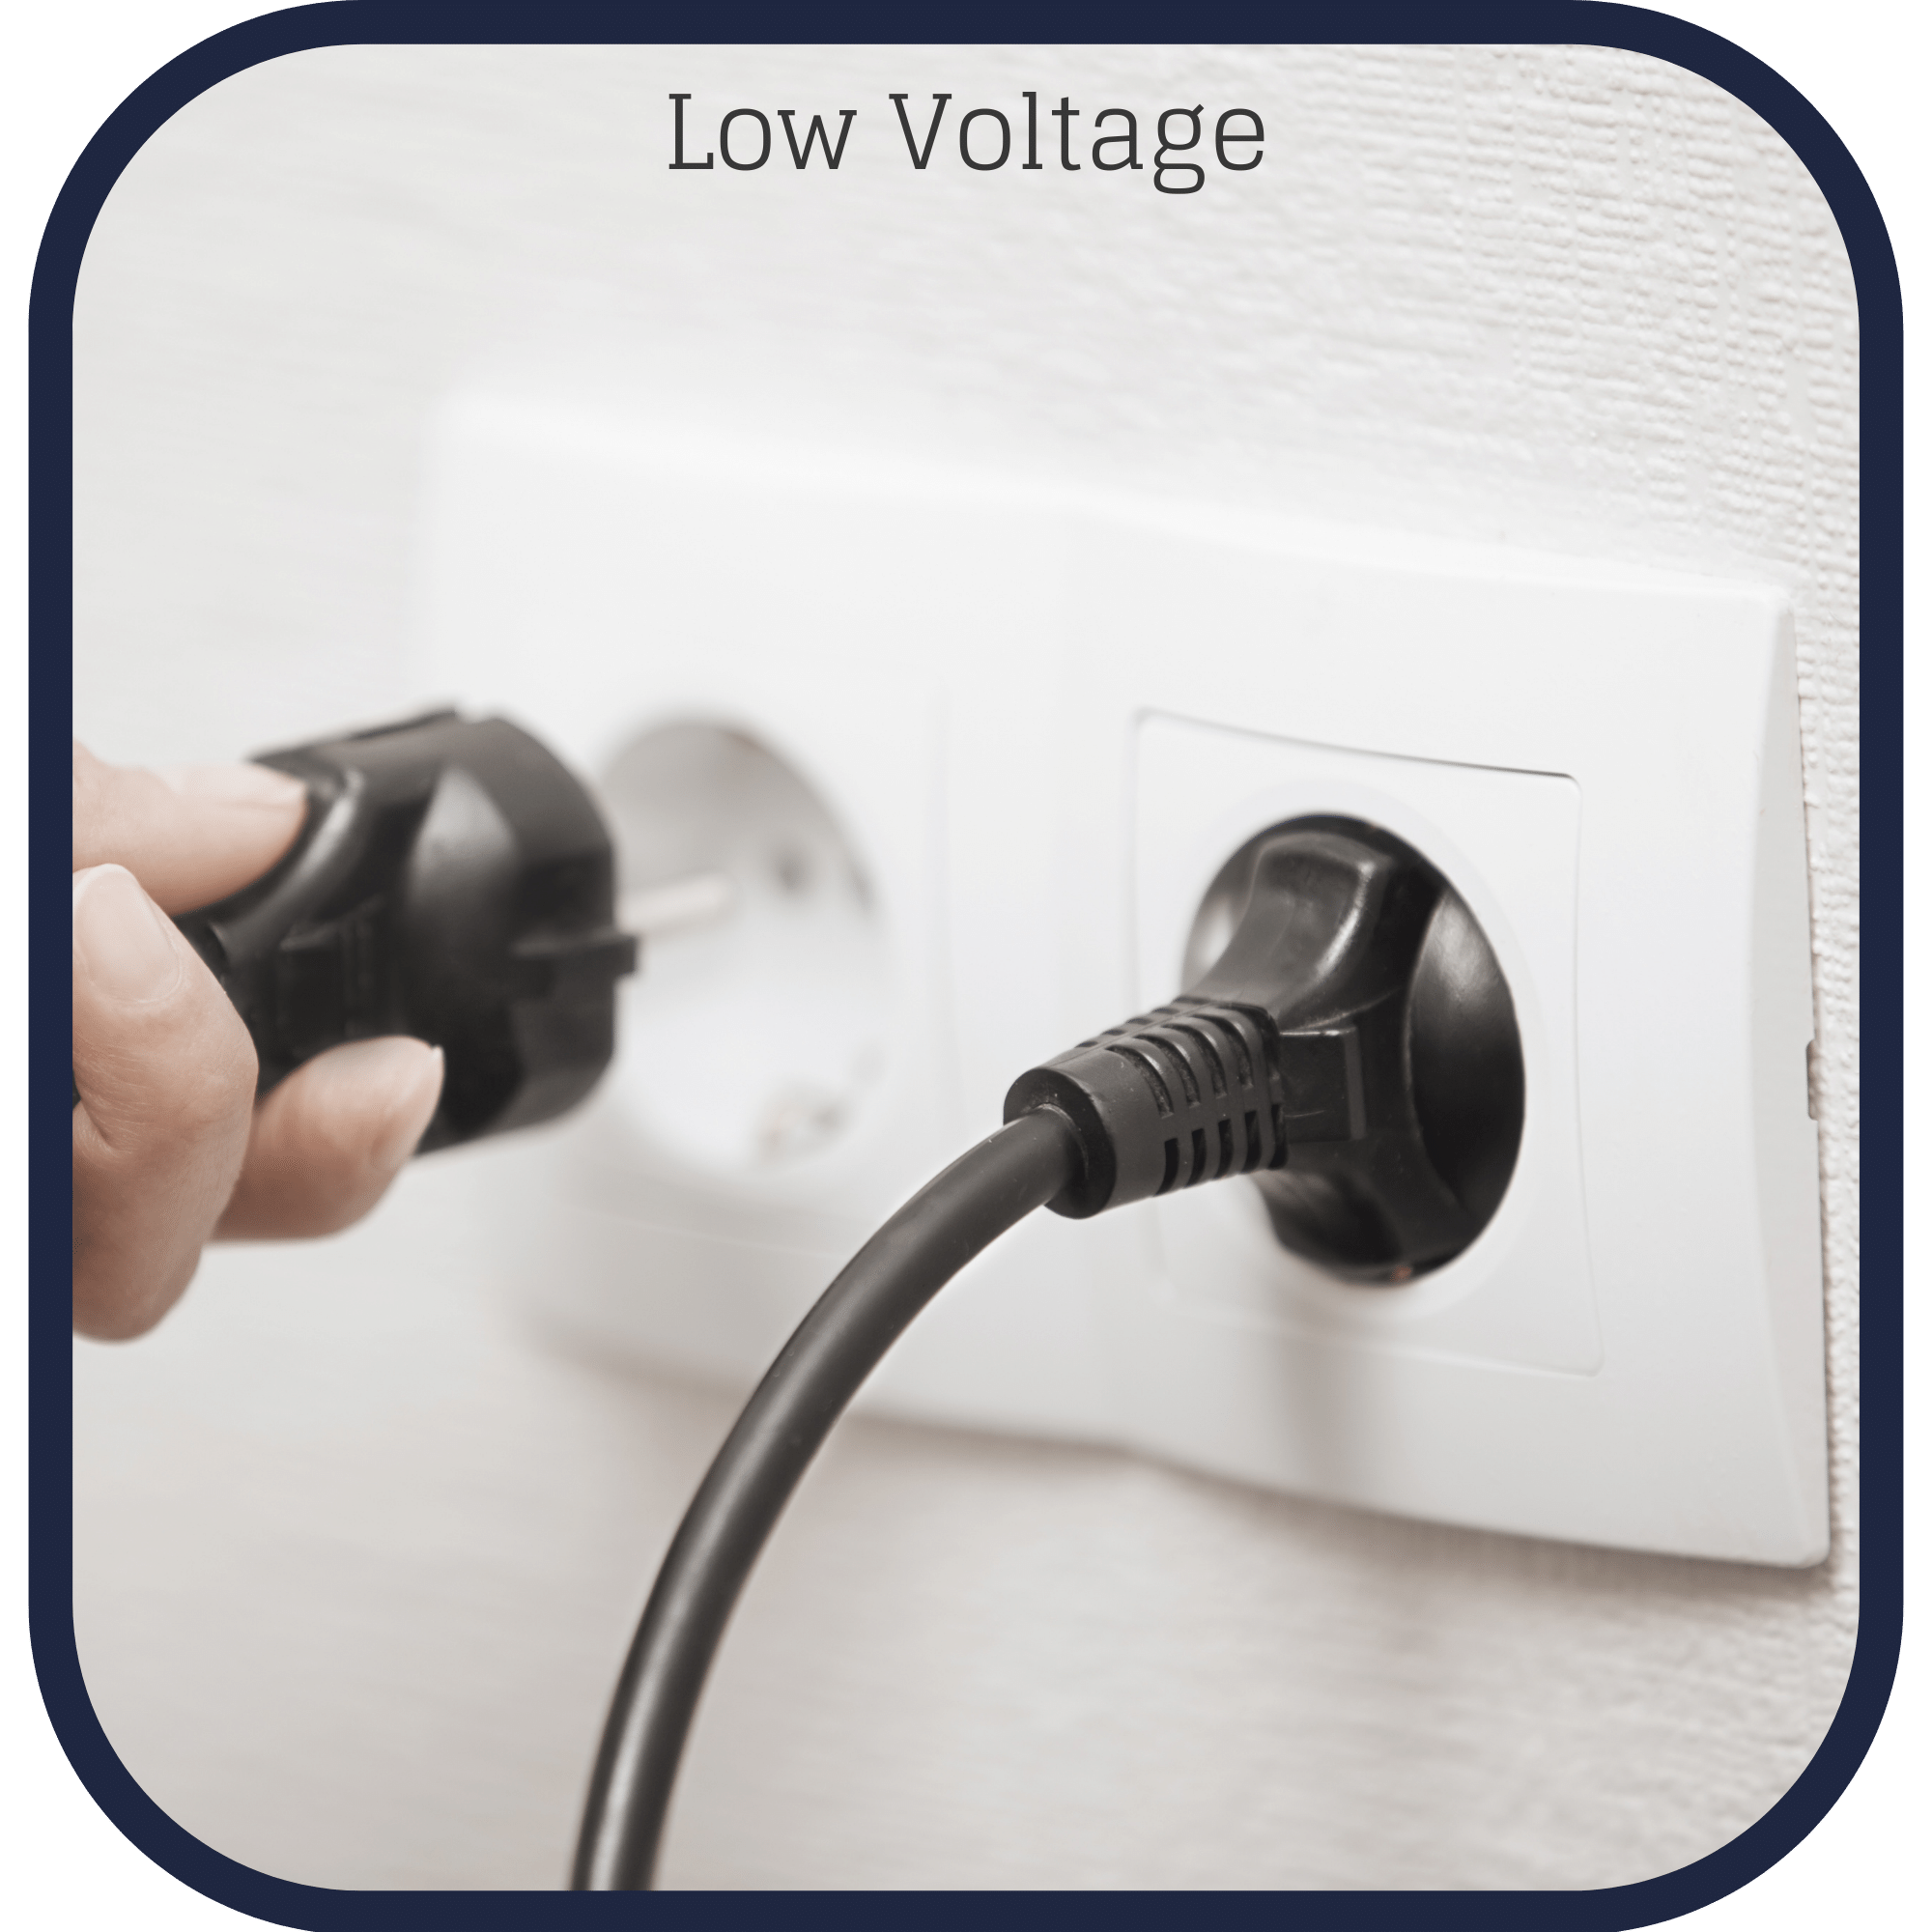 What's the difference between 220 volts, 230 volts, 240 volts? Will my  equipment work? 